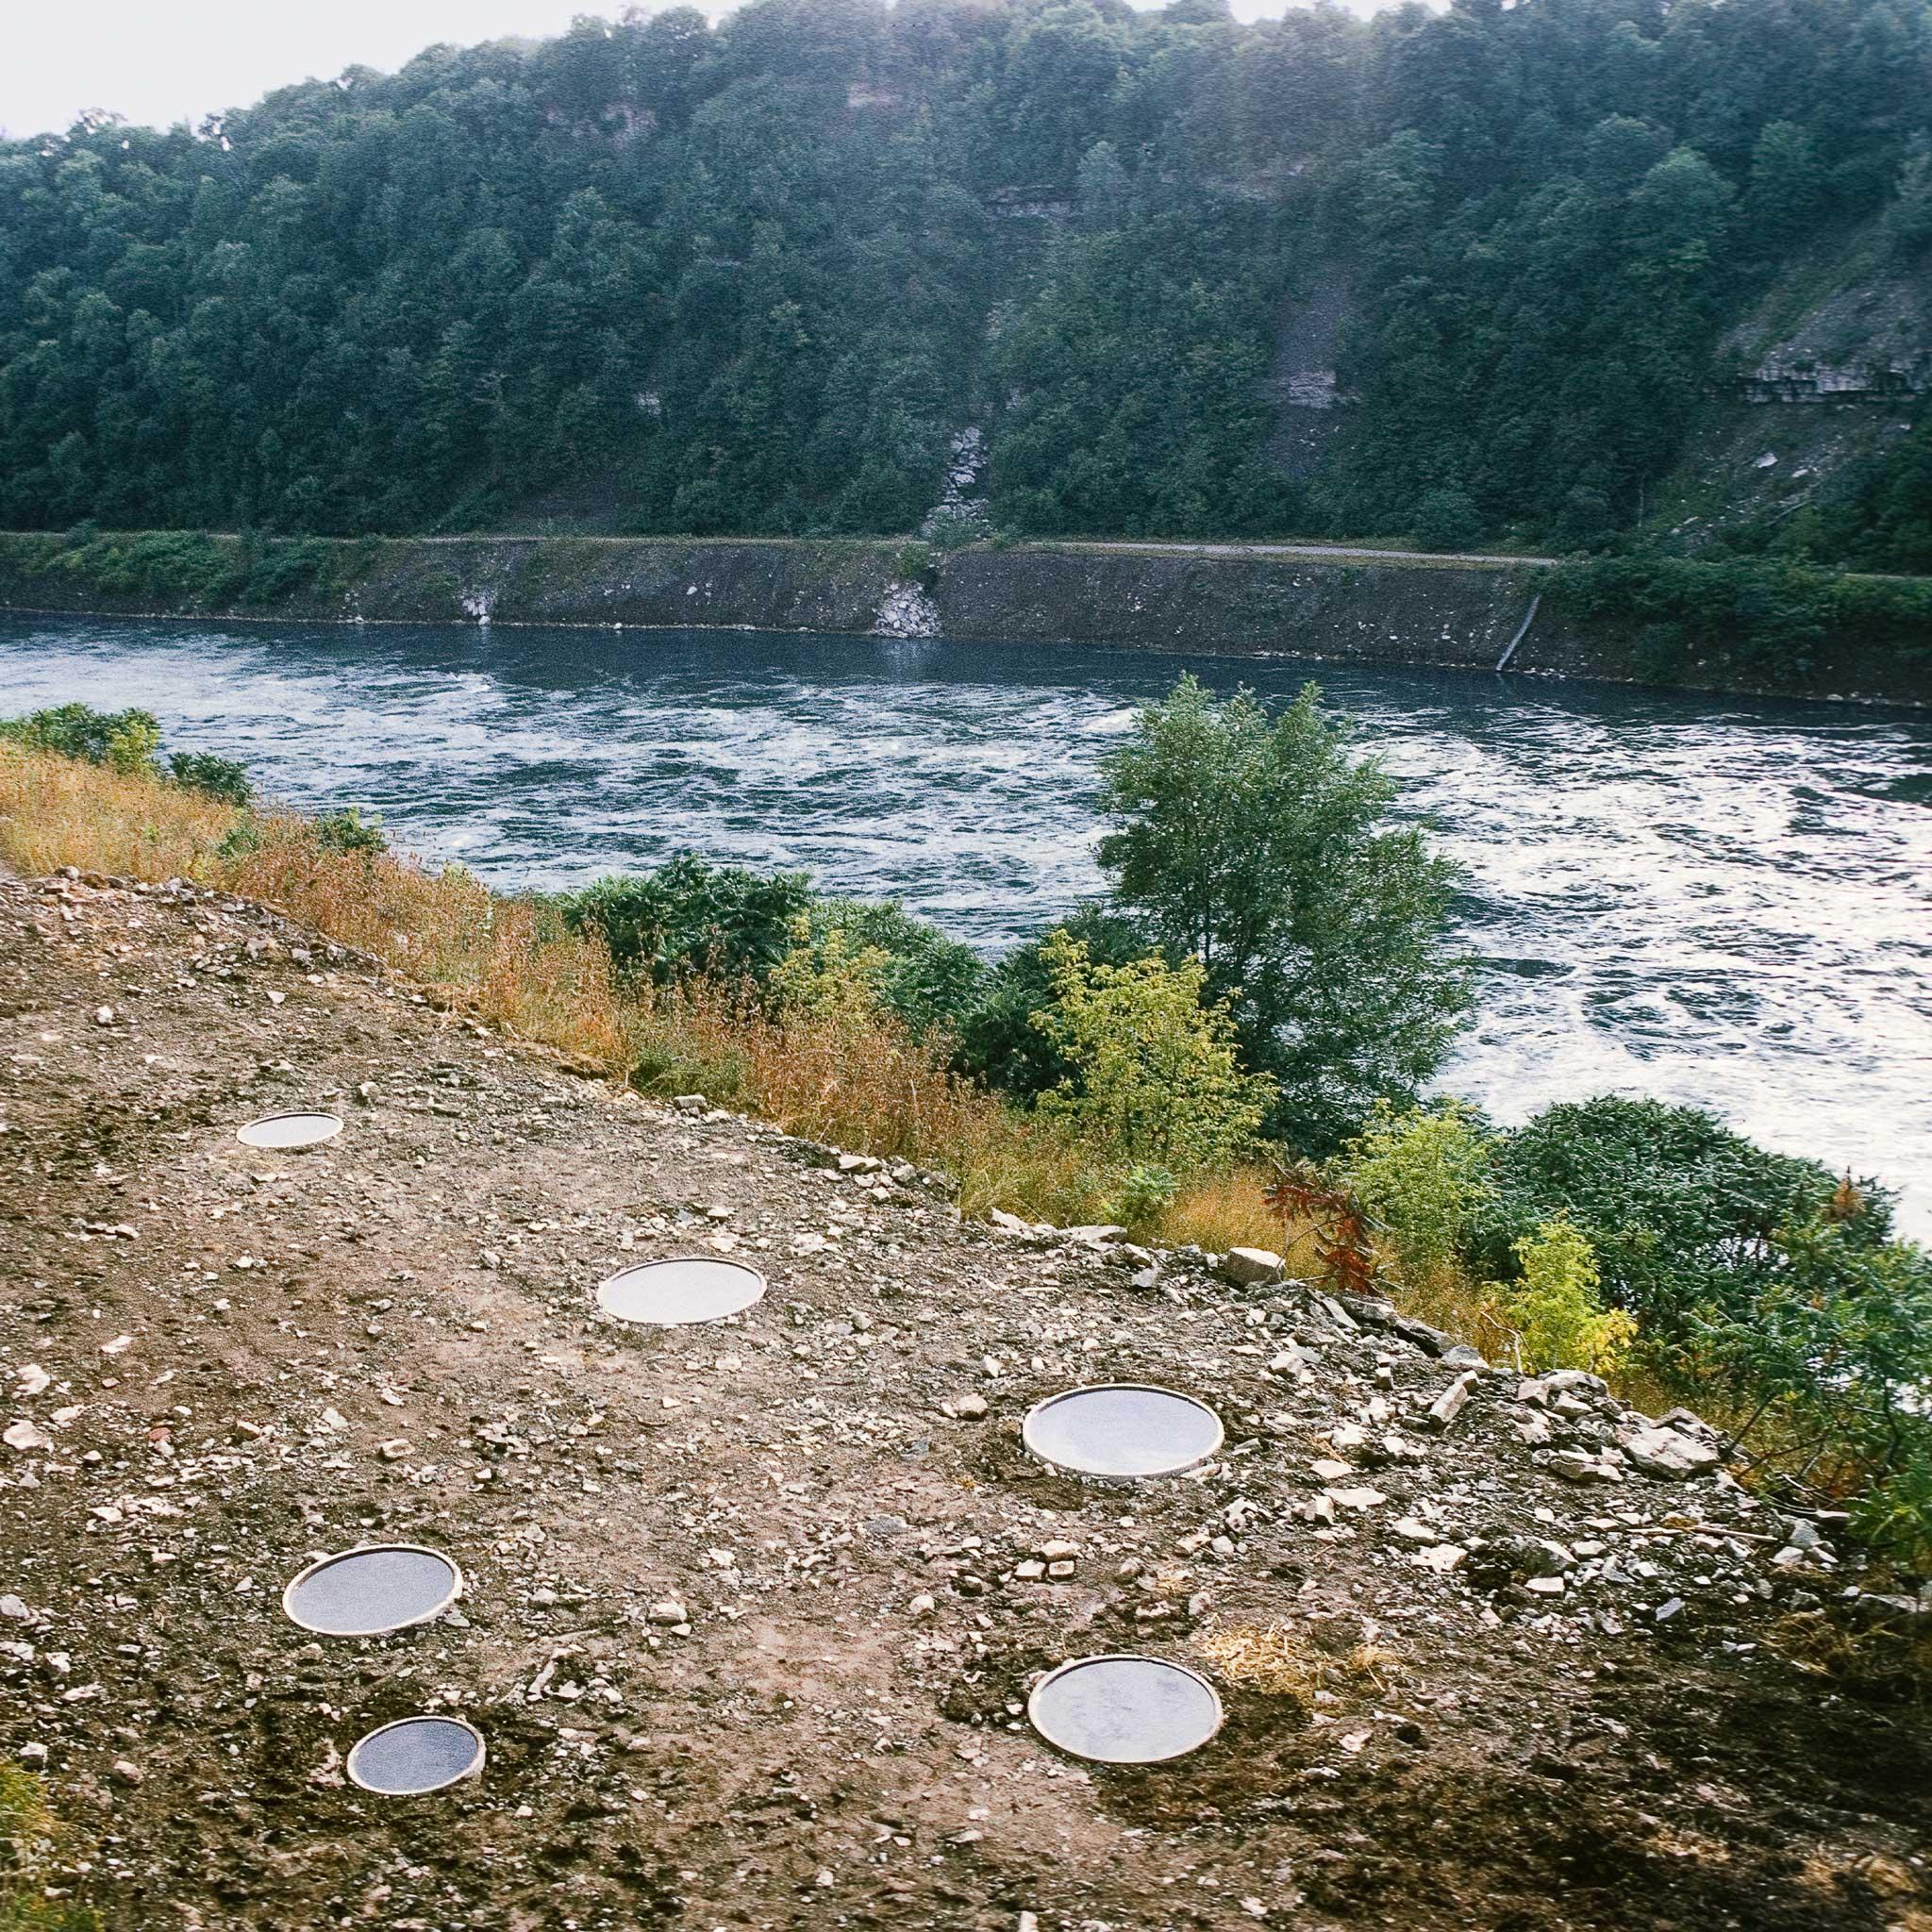 A series of small circular pools in the position of the constellation Hydra along a river bank. River and woods beyond in the background.